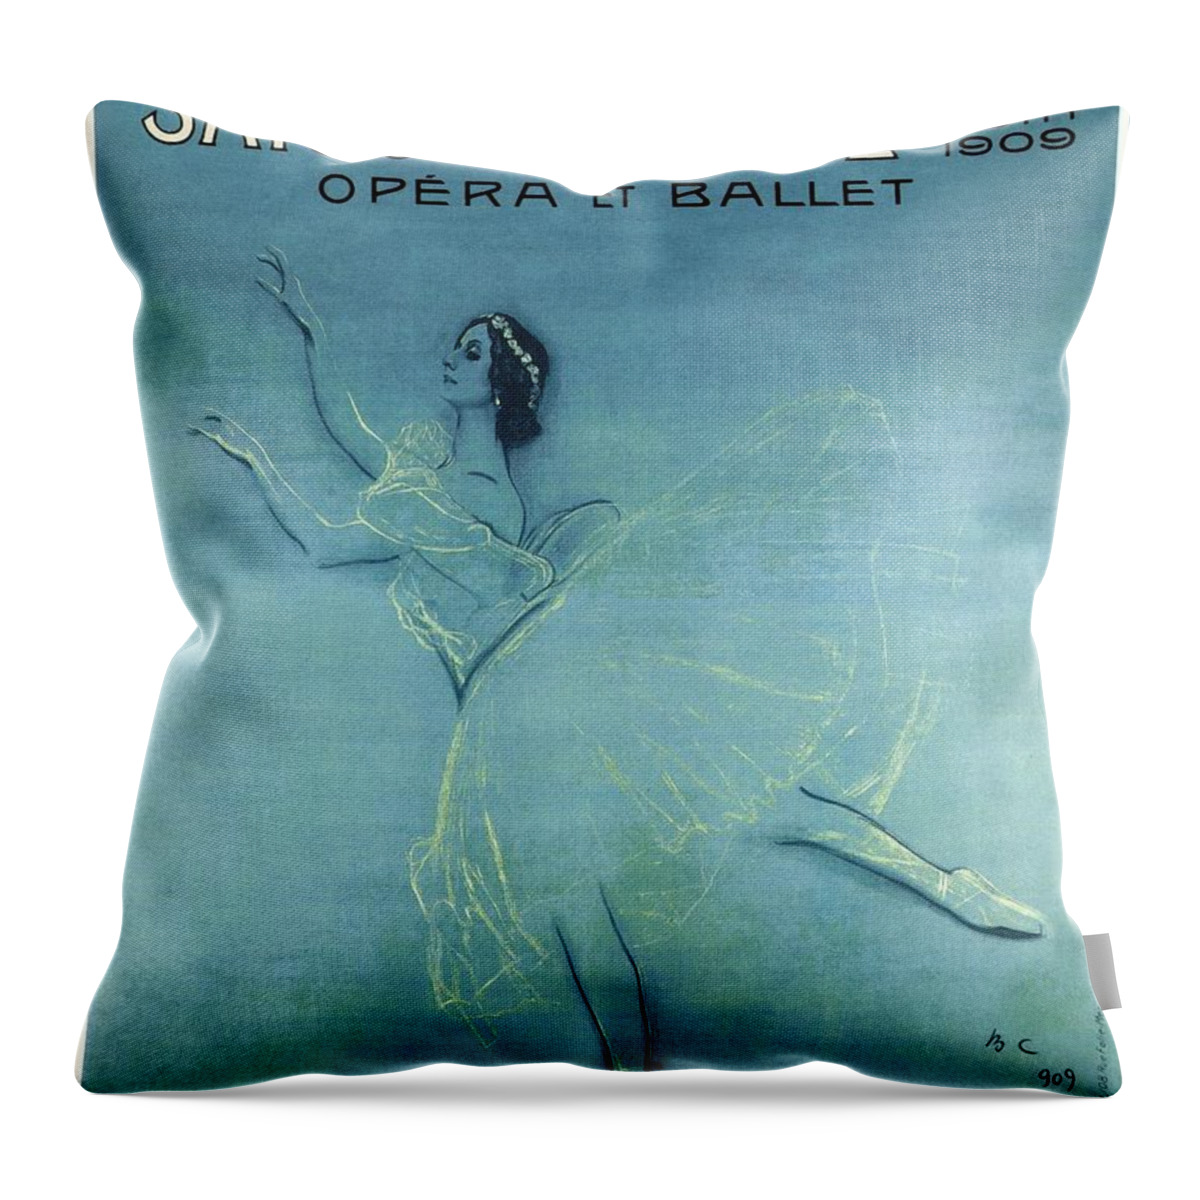 Exposition Throw Pillow featuring the photograph Saison Russe - Opera and Ballet - Theatre 1909 - Retro travel Poster - Vintage Poster by Studio Grafiikka